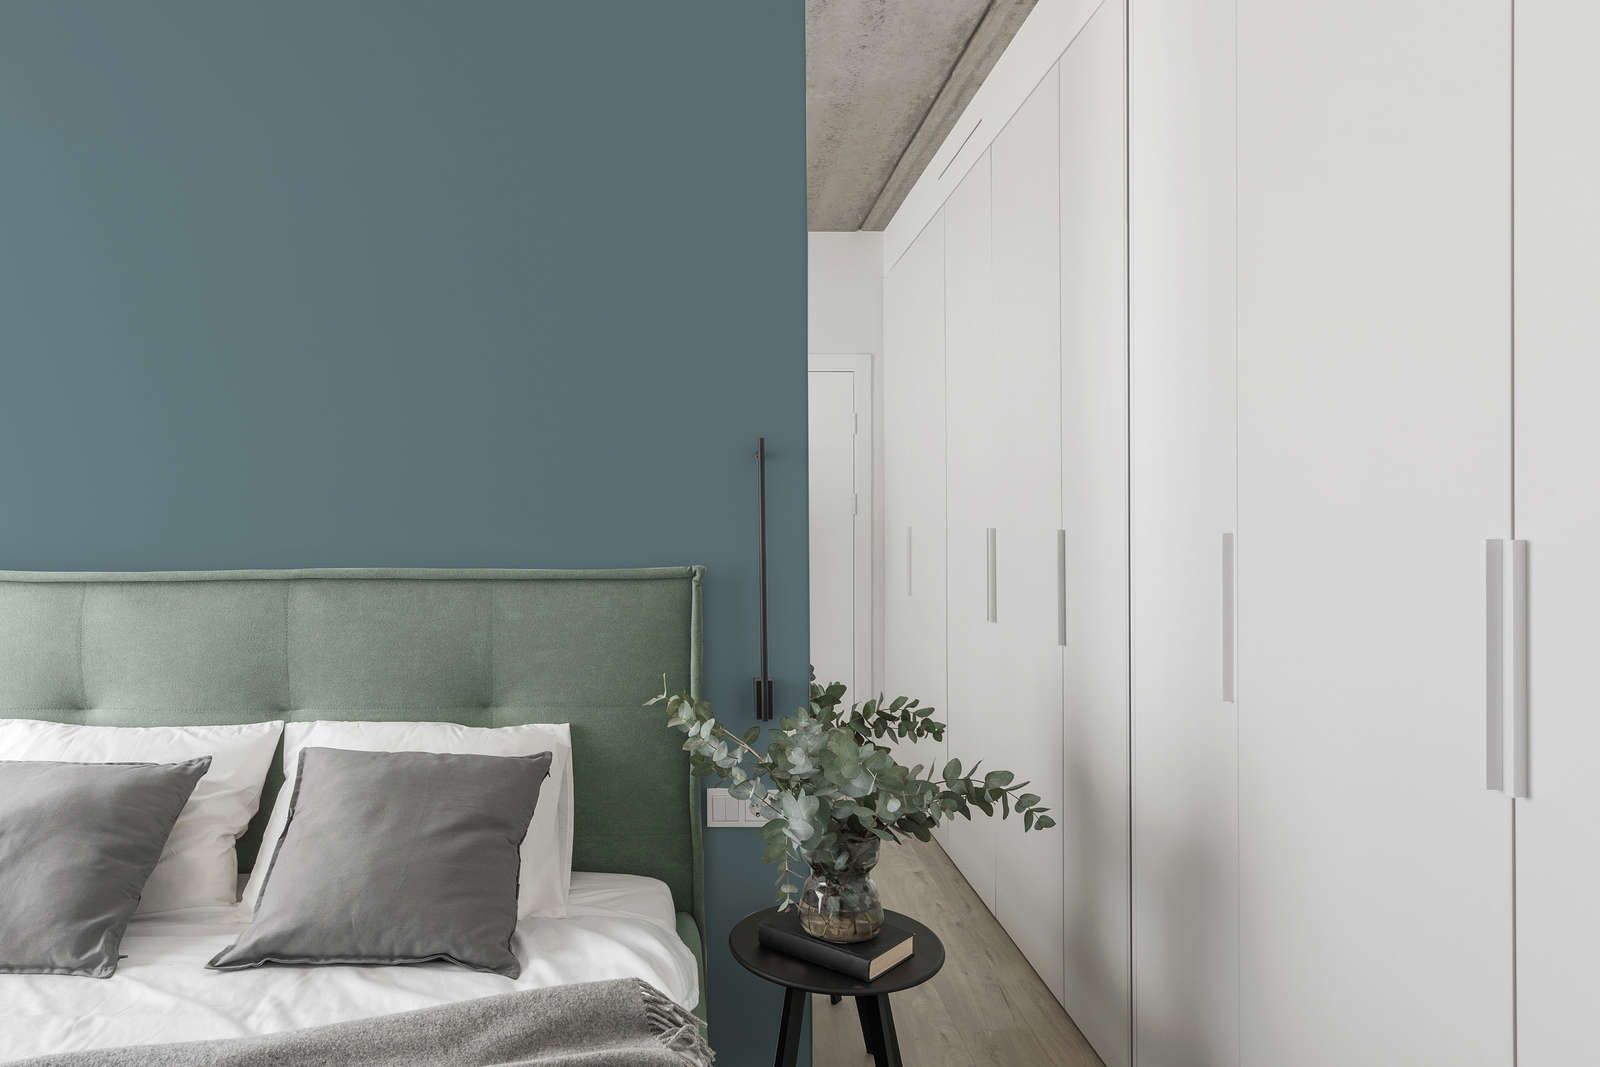             Premium Wall Paint Relaxing Dove Blue »Balanced Blue« NW311 – 2.5 litre
        